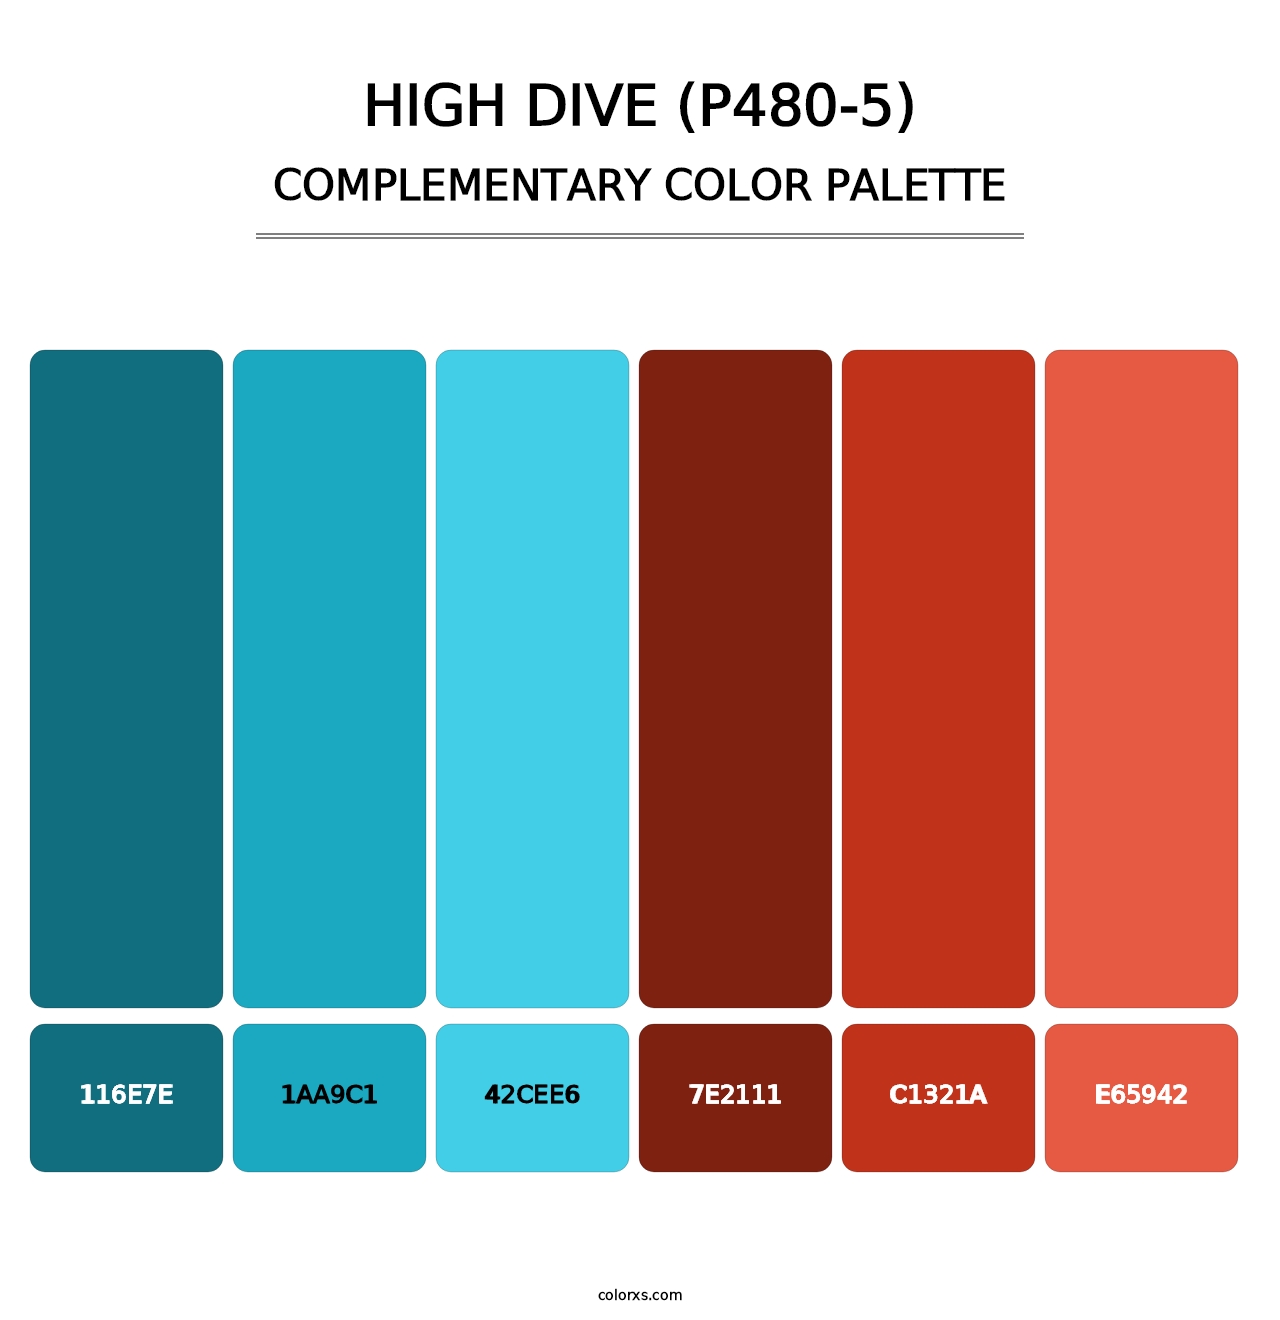 High Dive (P480-5) - Complementary Color Palette